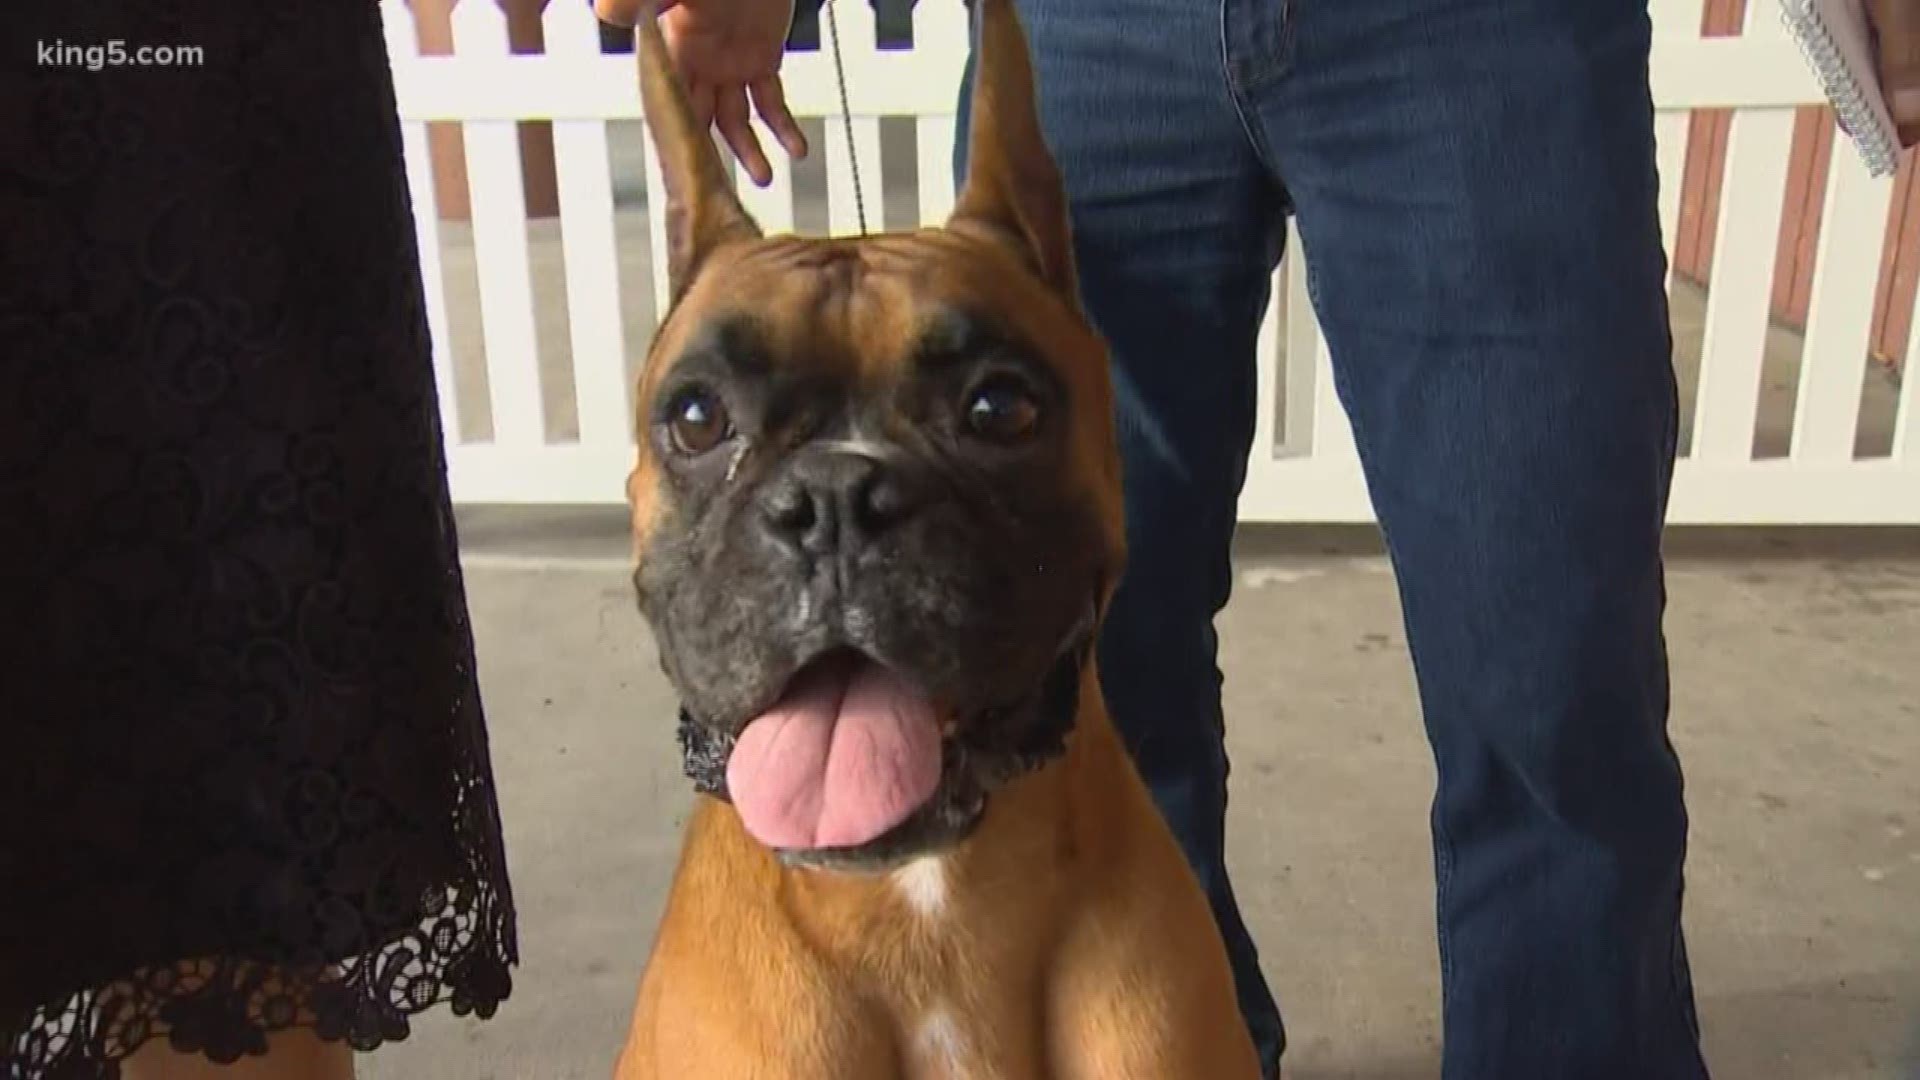 KING 5 Meteorologist Craig Herrera met 'Red' the Boxer and his owner at the Washington State Fair Thursday where they just won a big competition.